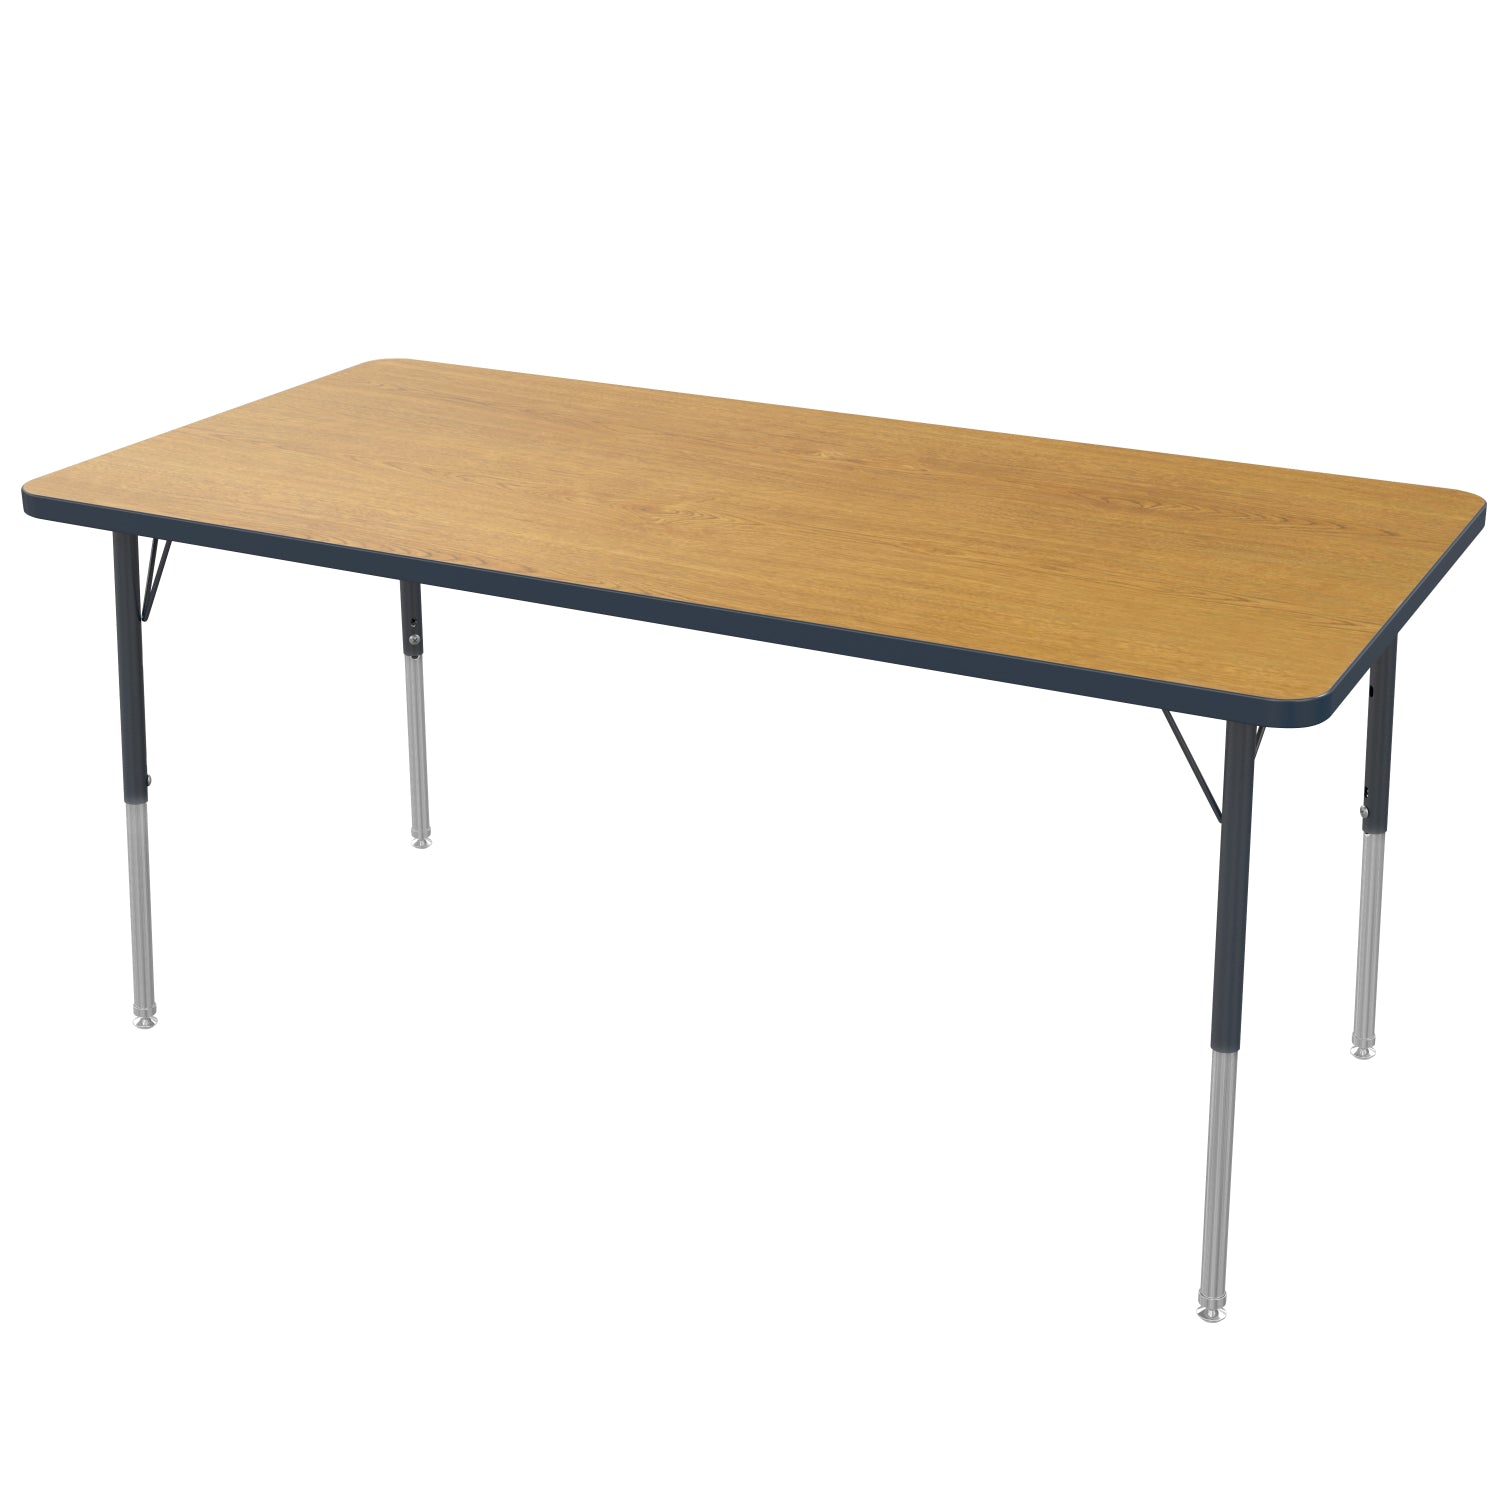 MG Series Adjustable Height Activity Table, 30" x 60" Rectangle